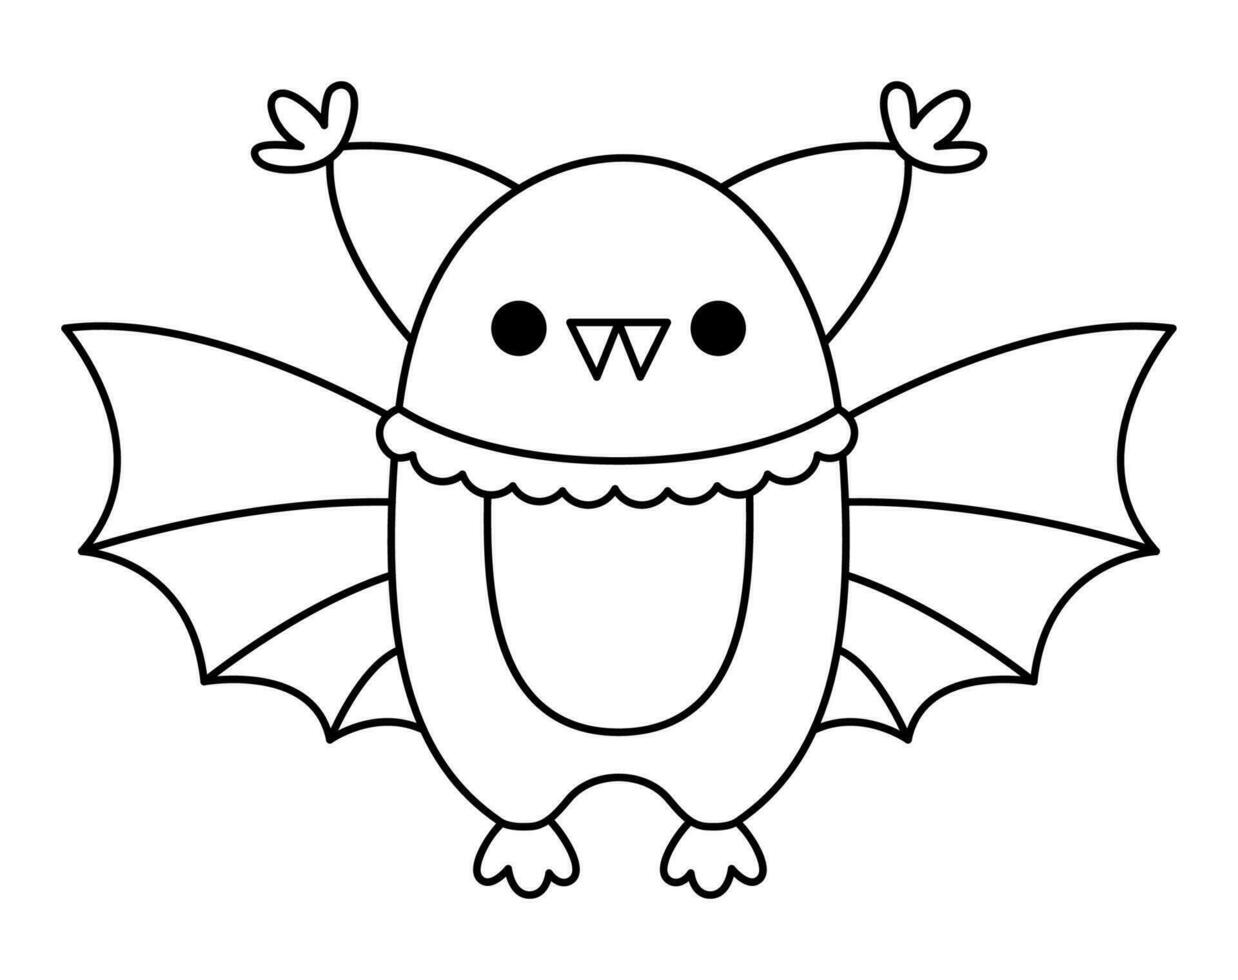 Vector black and white kawaii bat. Cute smiling Halloween line character for kids. Funny autumn all saints day cartoon animal with spread wings illustration. Samhain party icon or coloring page